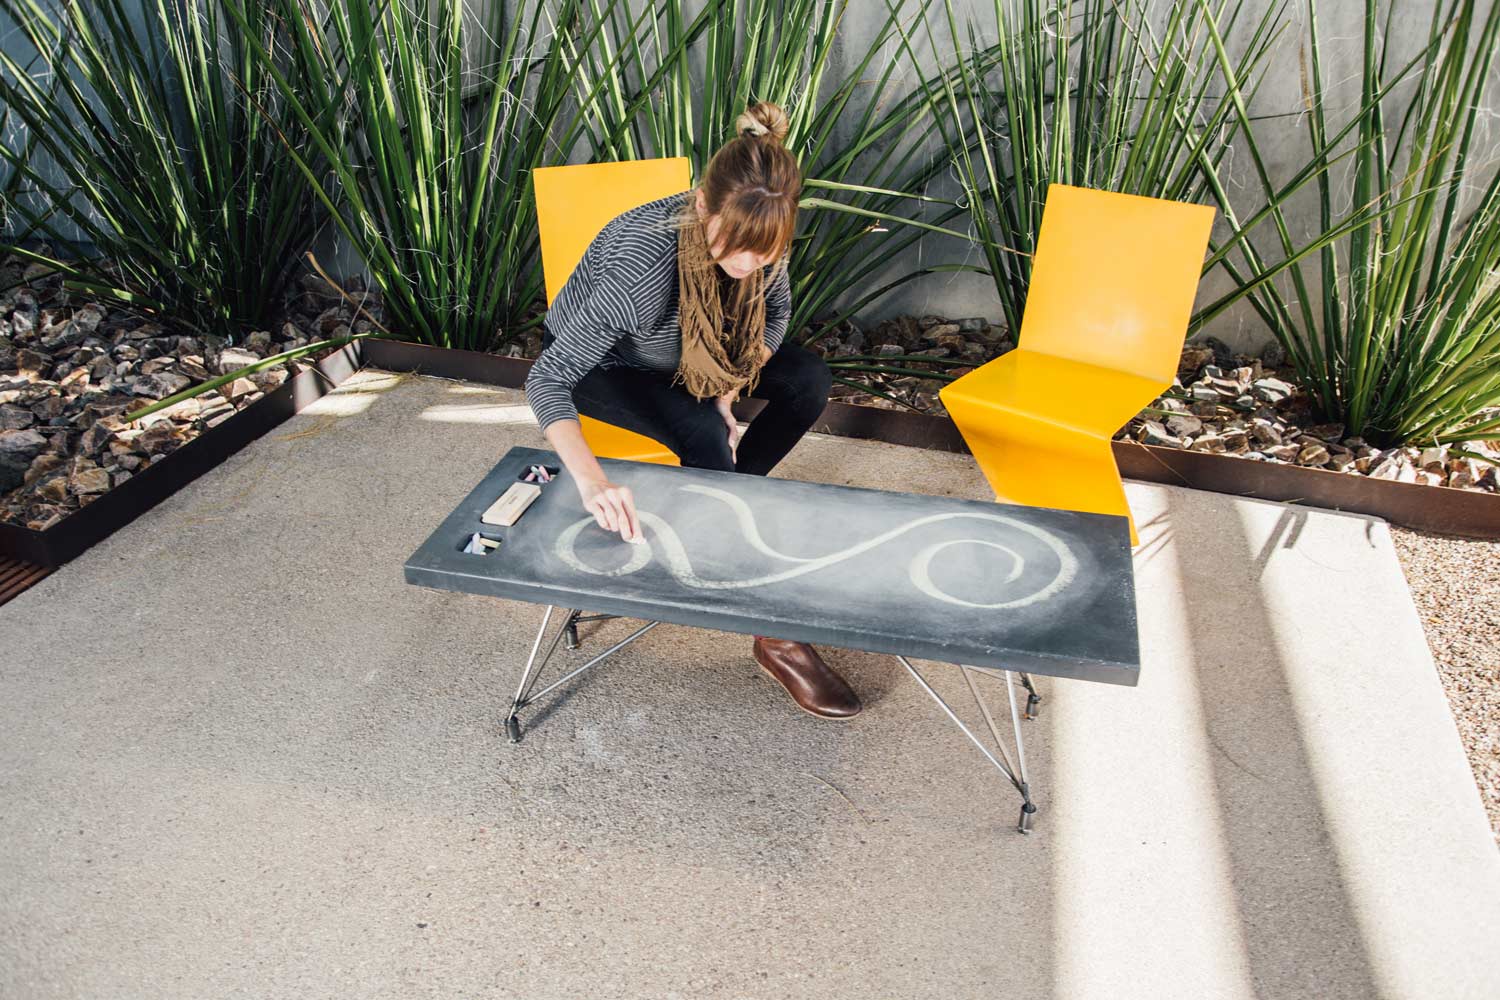 The SLATE Concrete and Steel Chalkboard Coffee Table by Hard Goods Tucson